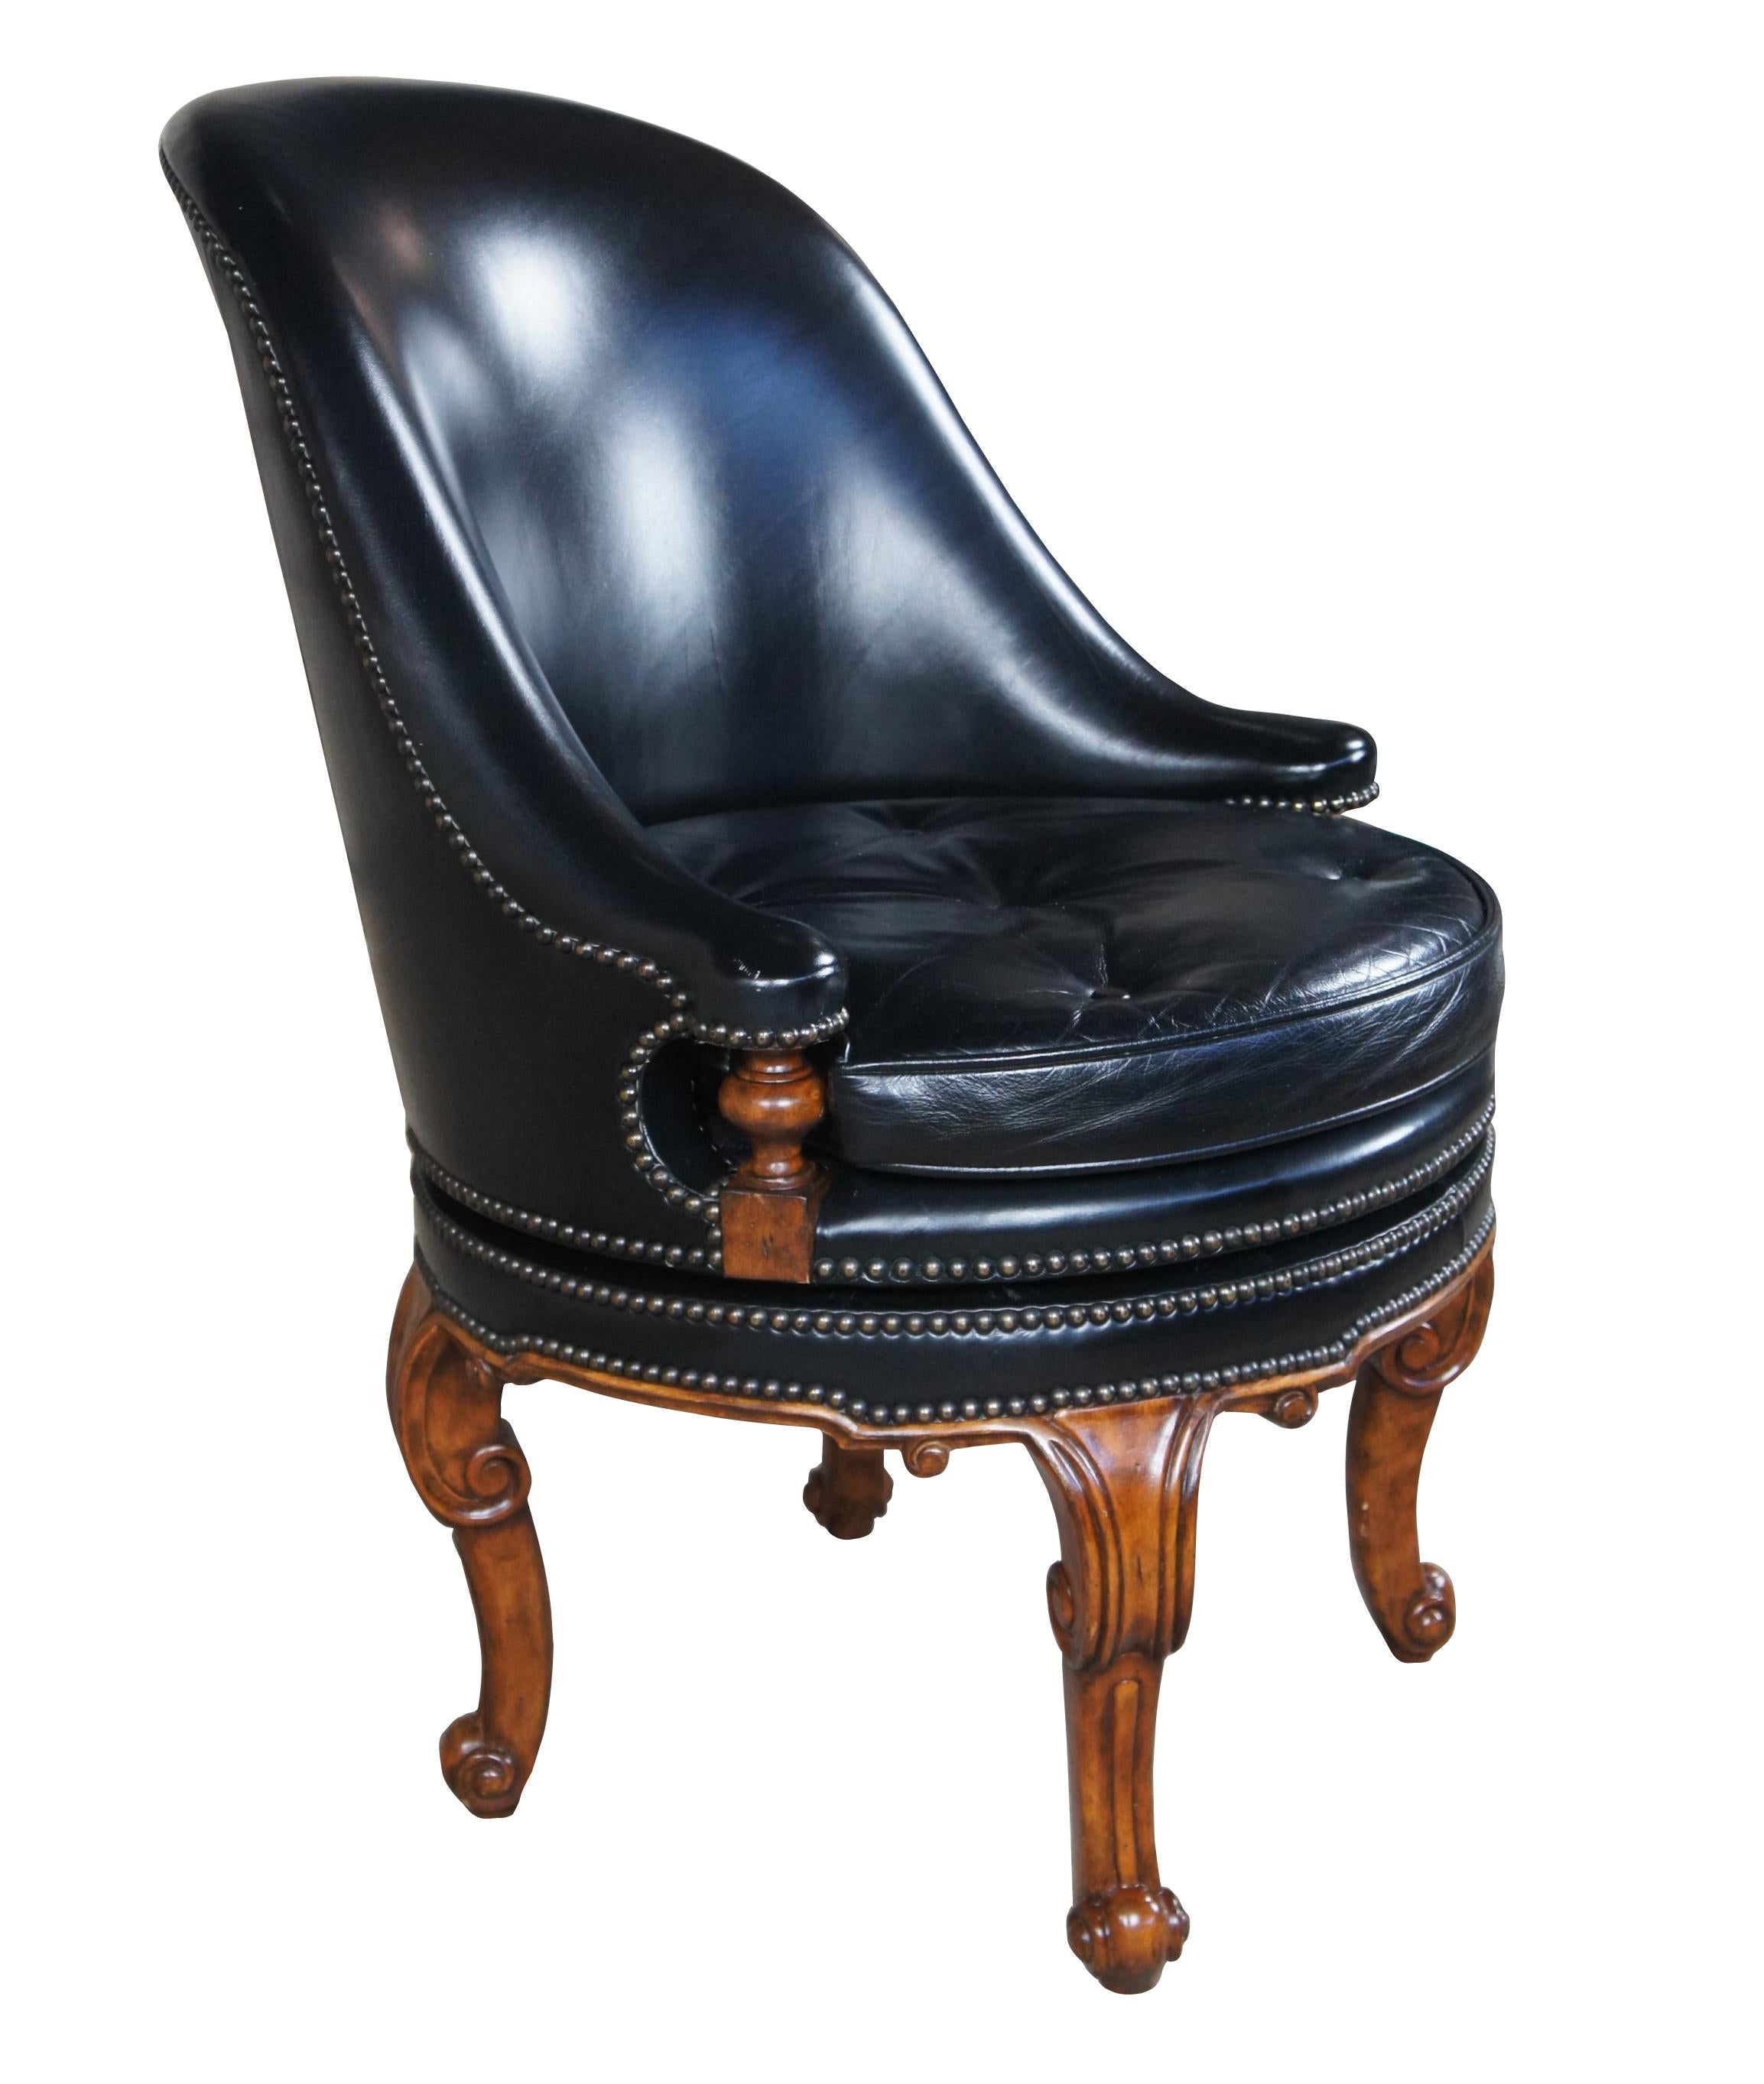 Modern Maitland Smith Traditional Black Leather Spoon Back Swivel Game Desk Chair 4330